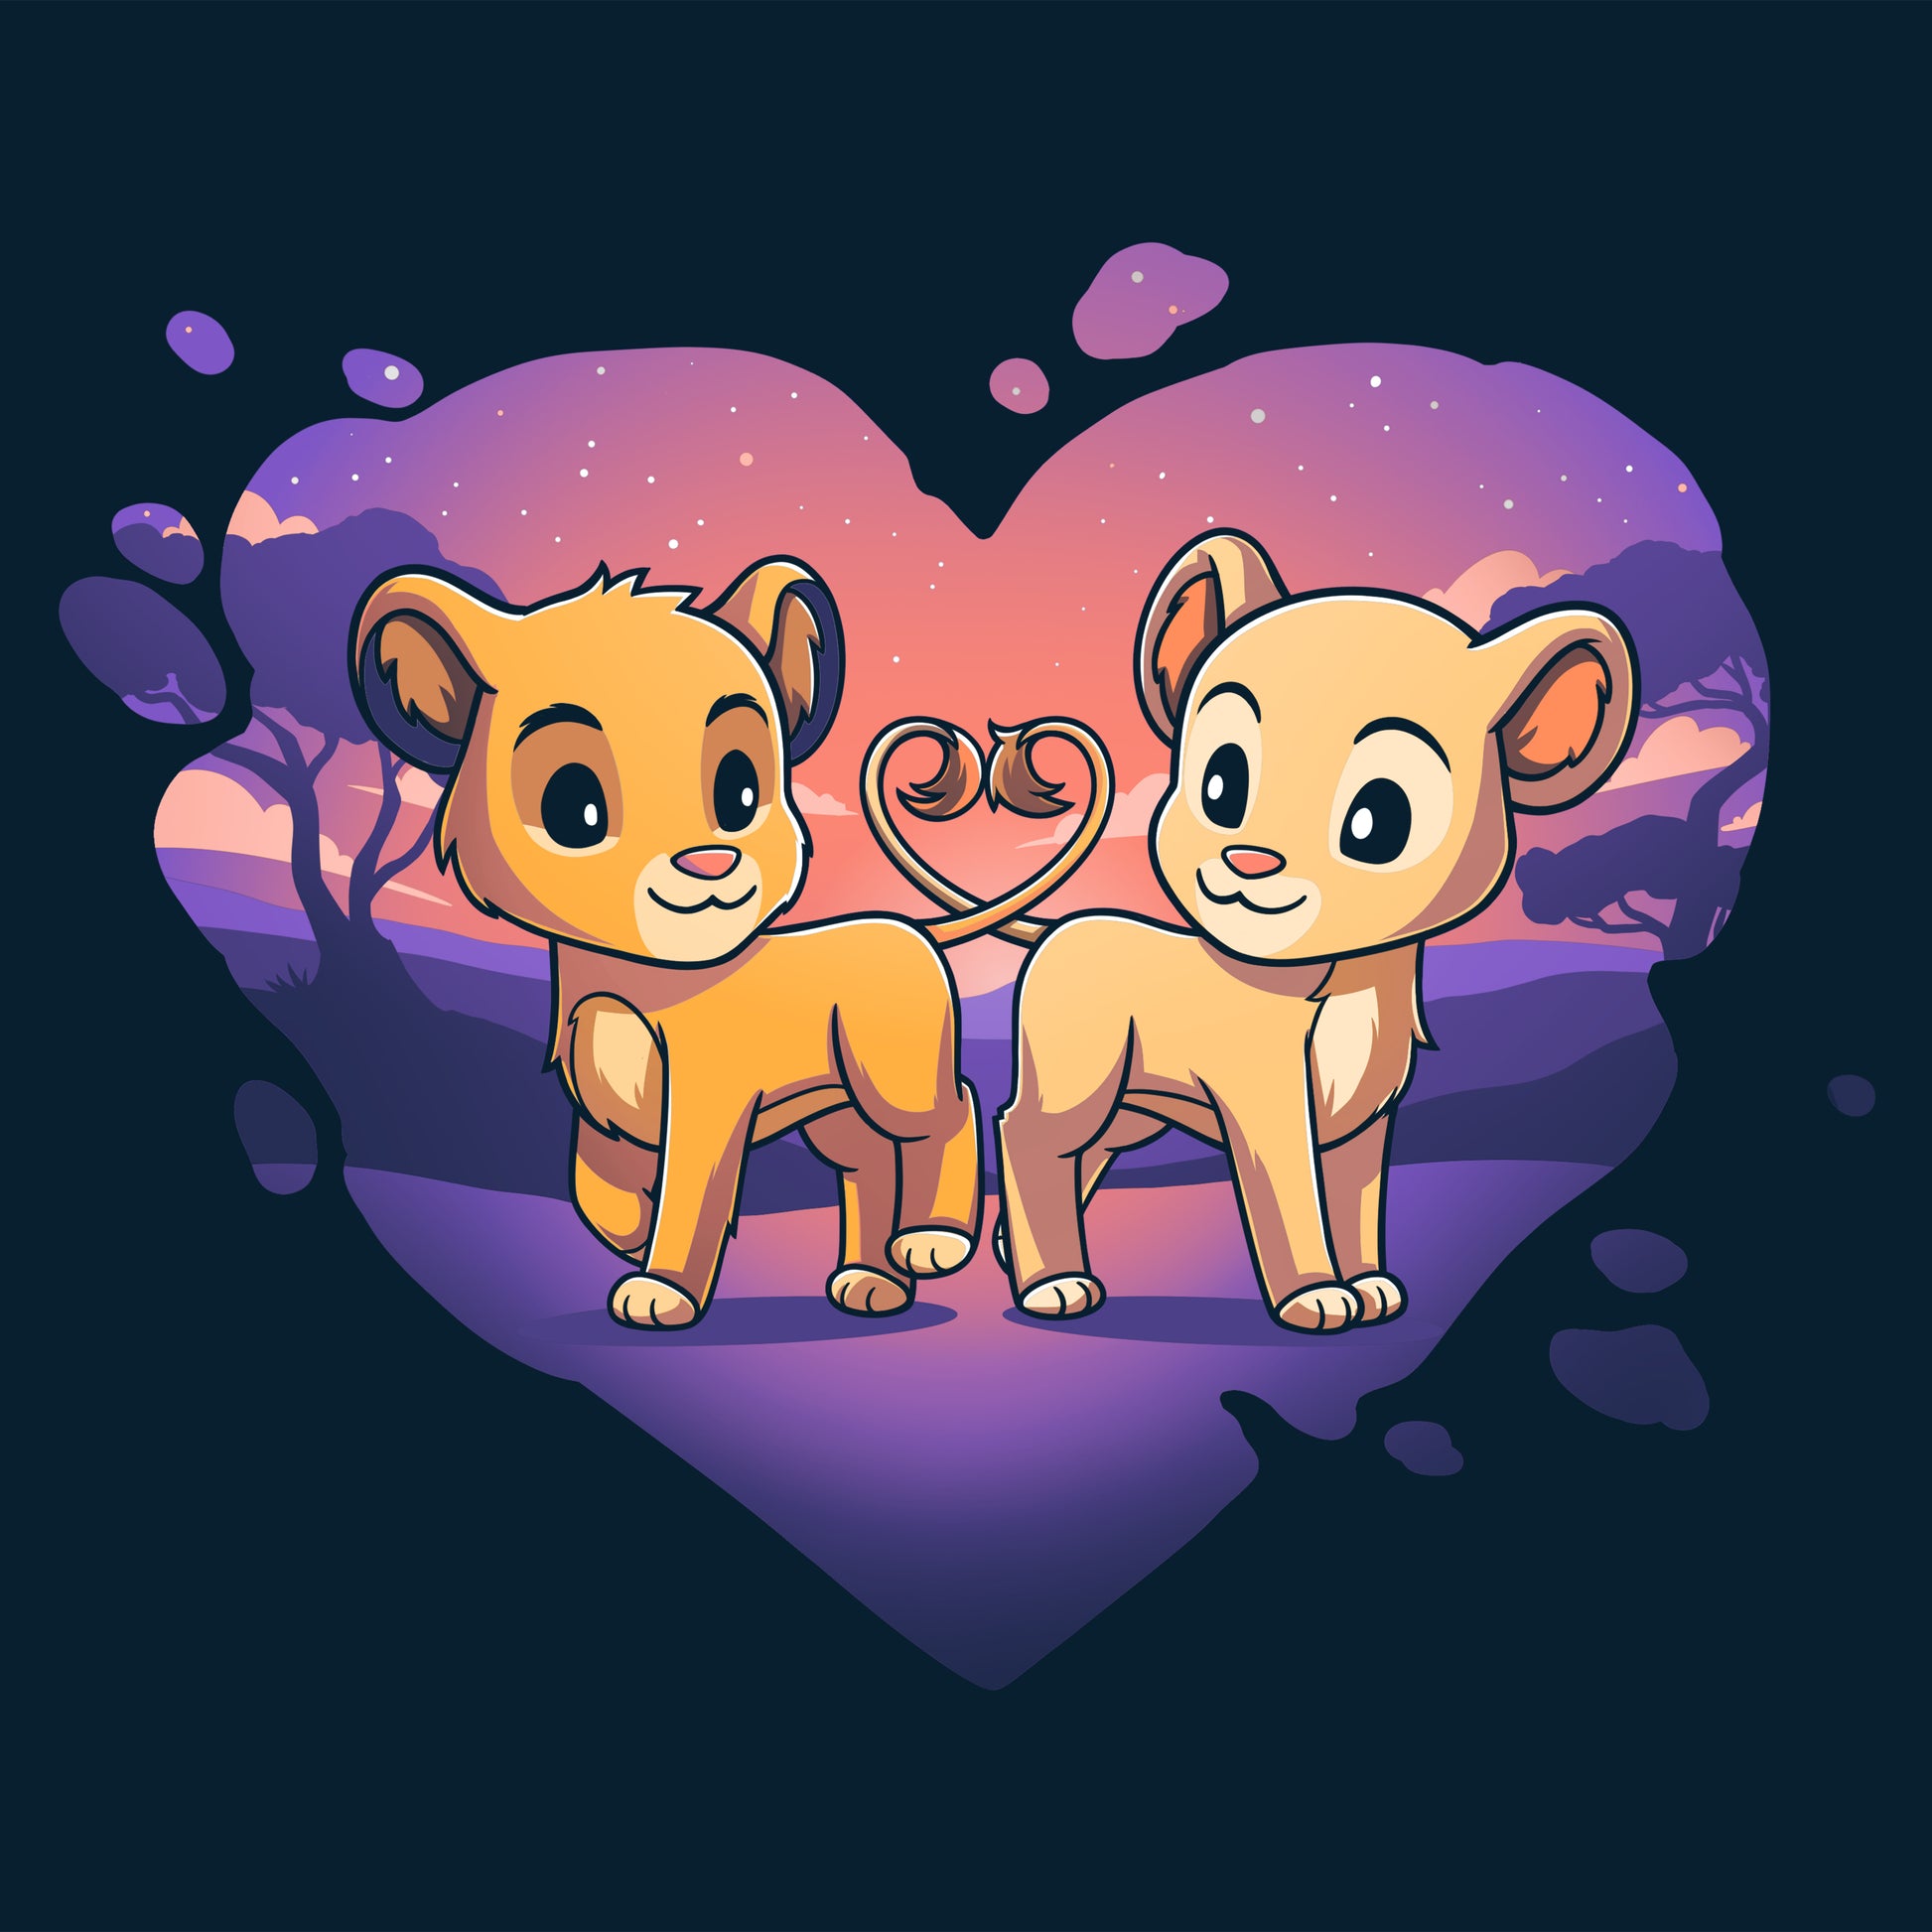 Two officially licensed Disney Lion King Simba and Nala lion cubs standing in front of a heart.